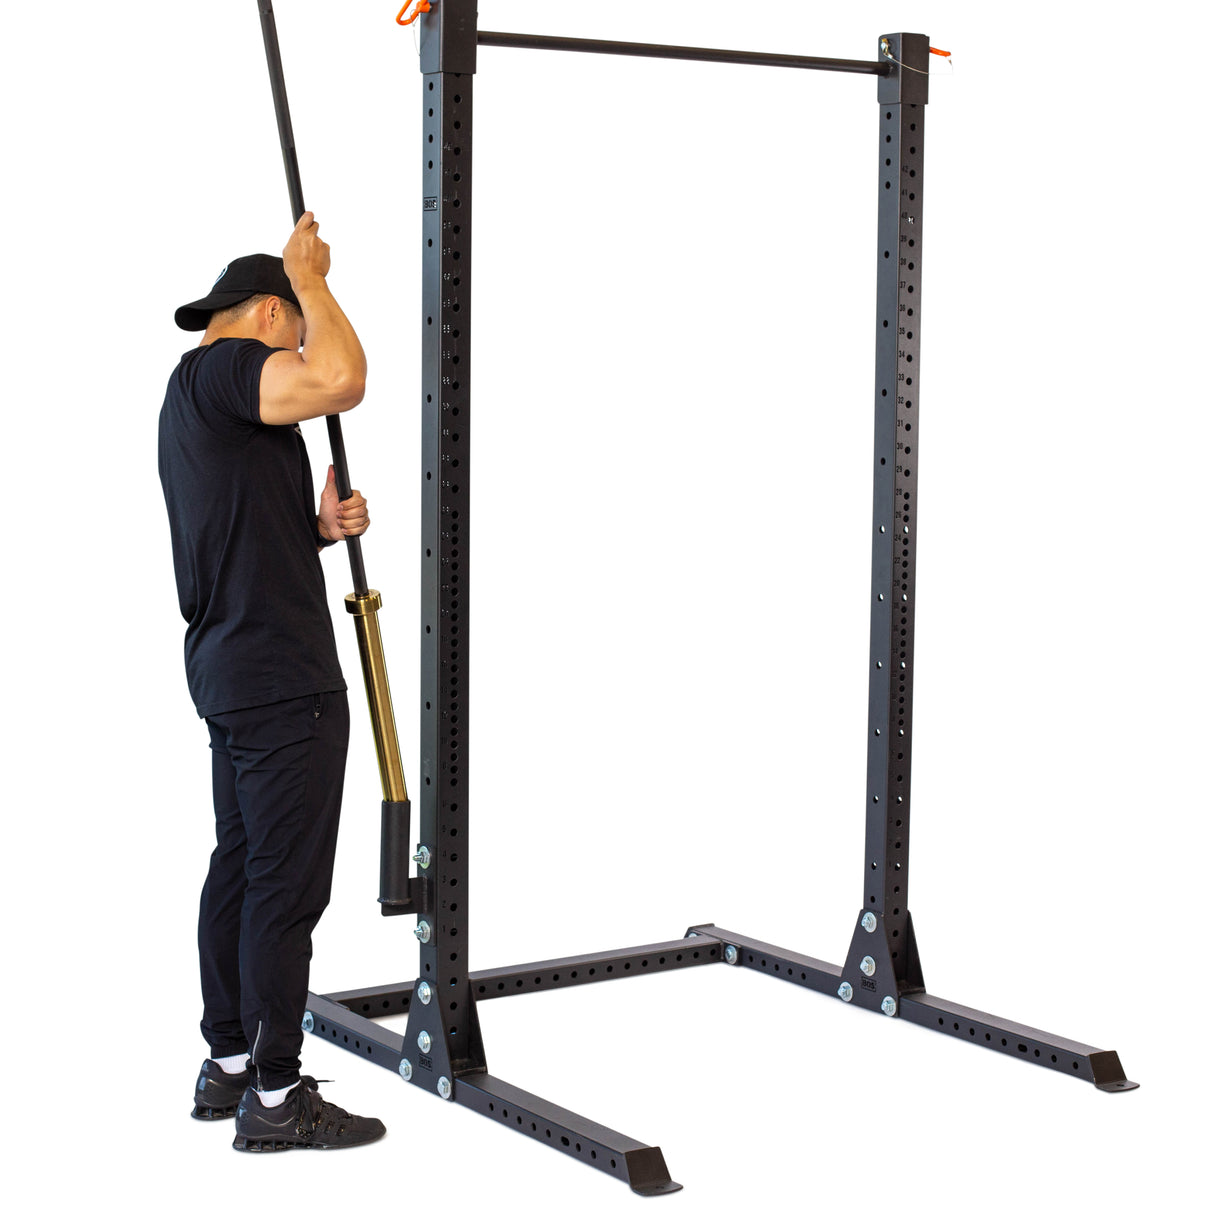 male athlete placing a barbell on the Vertical Mount Barbell Holder Rack Attachmentside view of the Vertical Mount Barbell Holder Rack Attachment